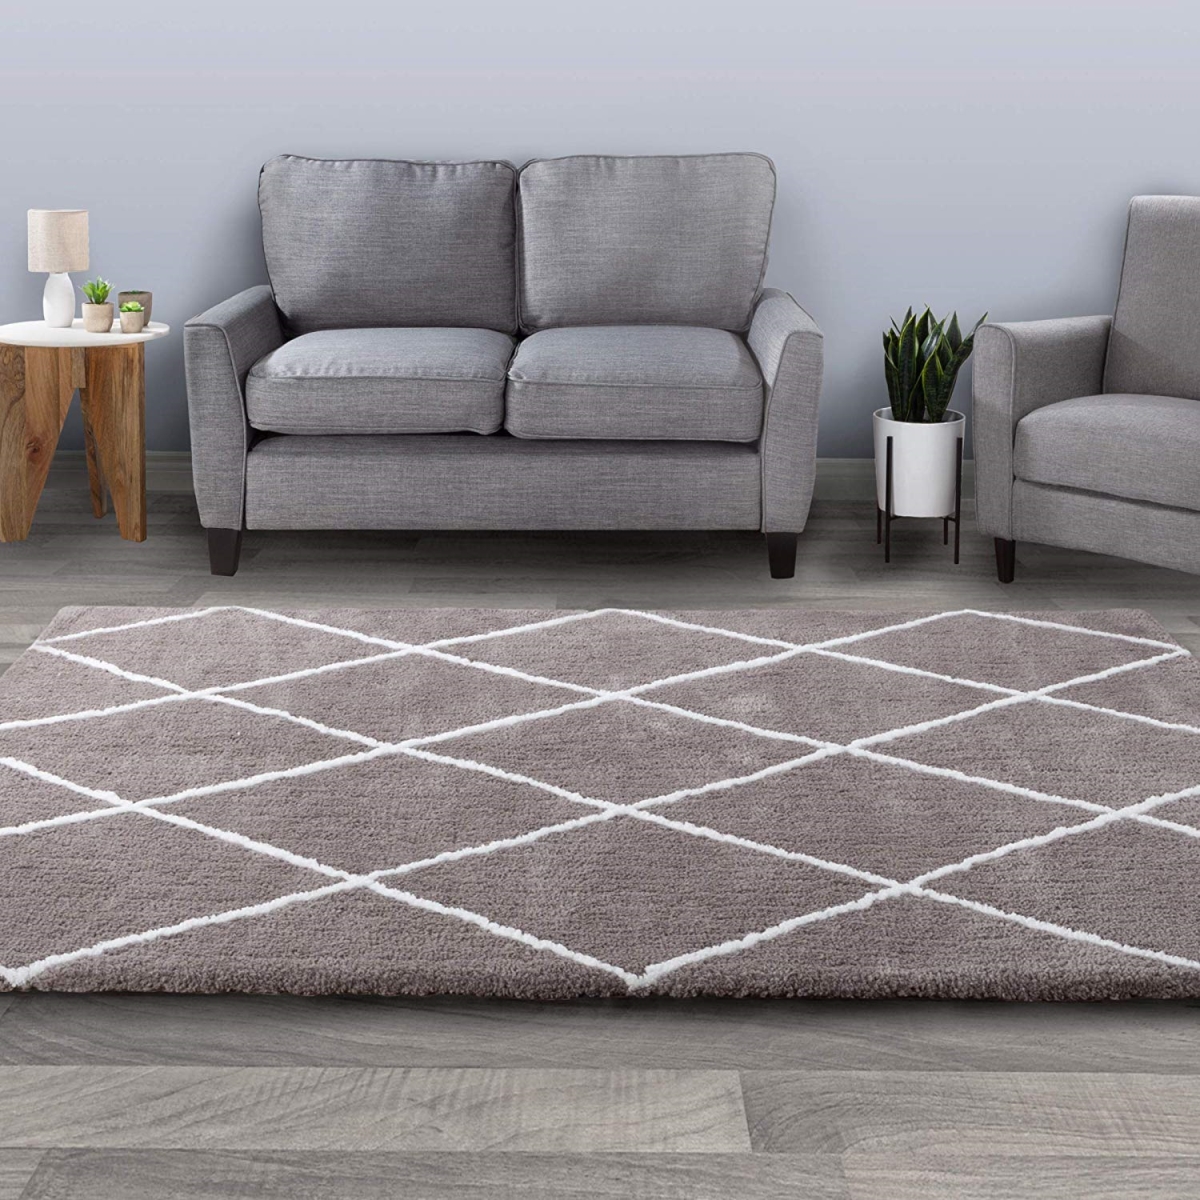 62a-64296 5 Ft. 3 In. X 7 Ft. 7 In. Diamond Shag Area Rug-plush Pattern Carpet, Gray & Ivory